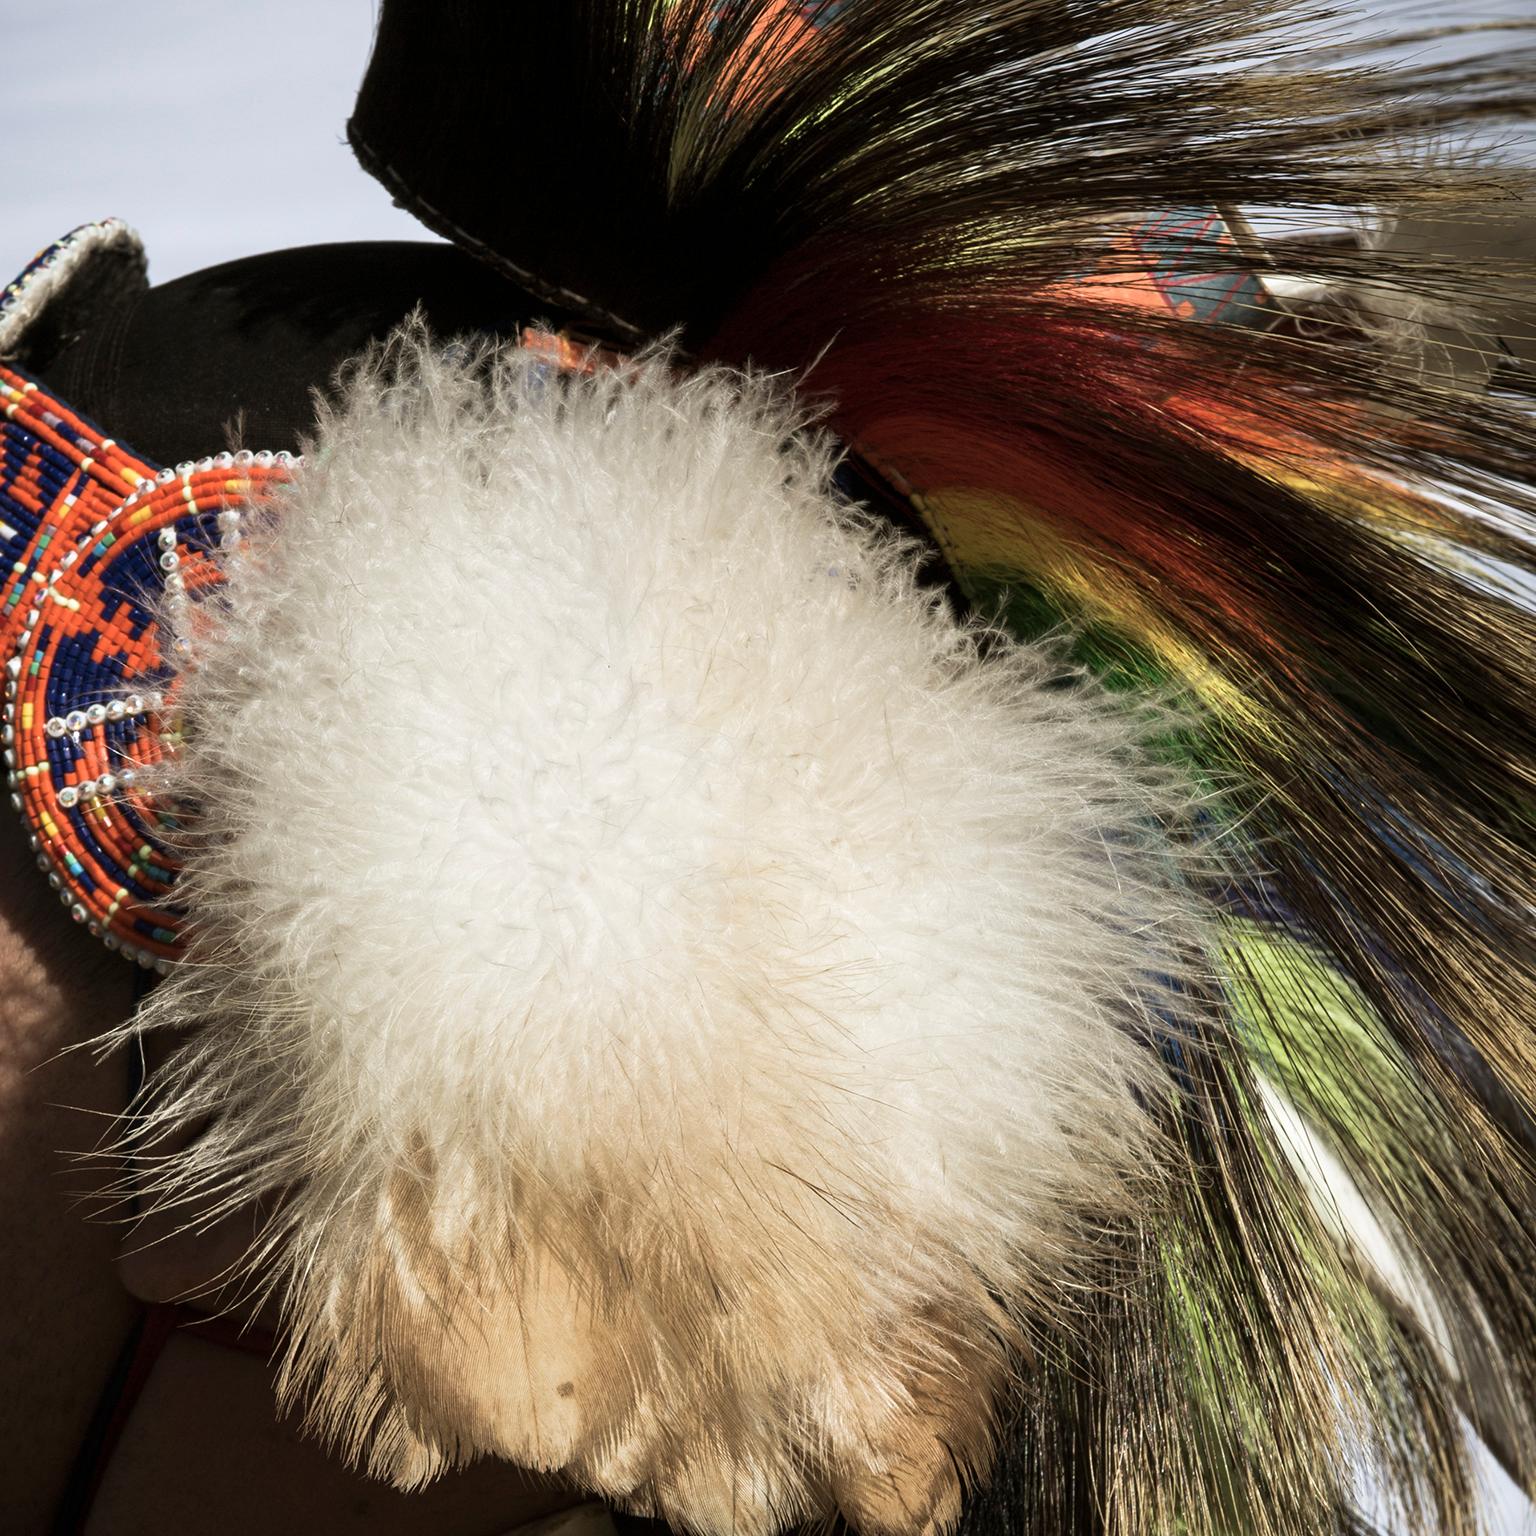 Portrait of First Nations Male Dancer in Traditional North American Costume, 2017

Canada, Ontario, Saint Catharines, Photograph by Cosmo Condina of a First Nations Male Dancer dressed in traditional North American Indian costume dancing at a Pow